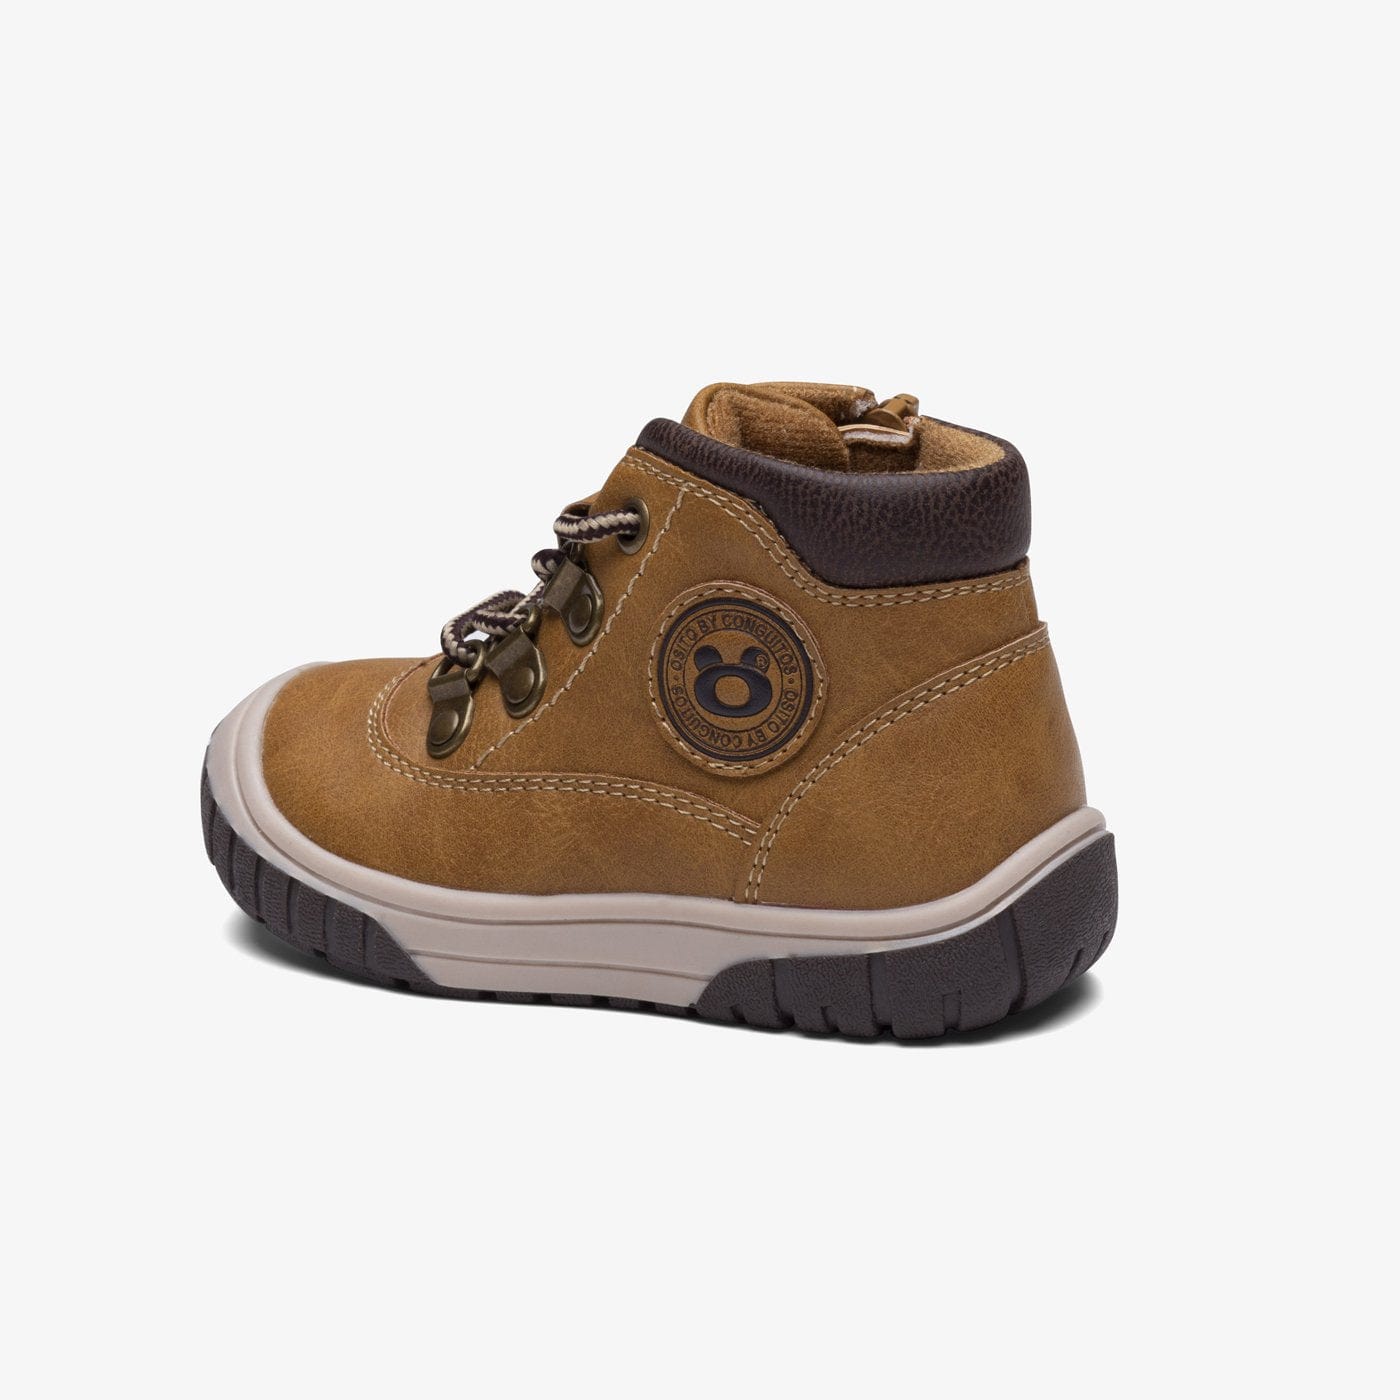 OSITO Shoes Baby's Camel Mountain Boots